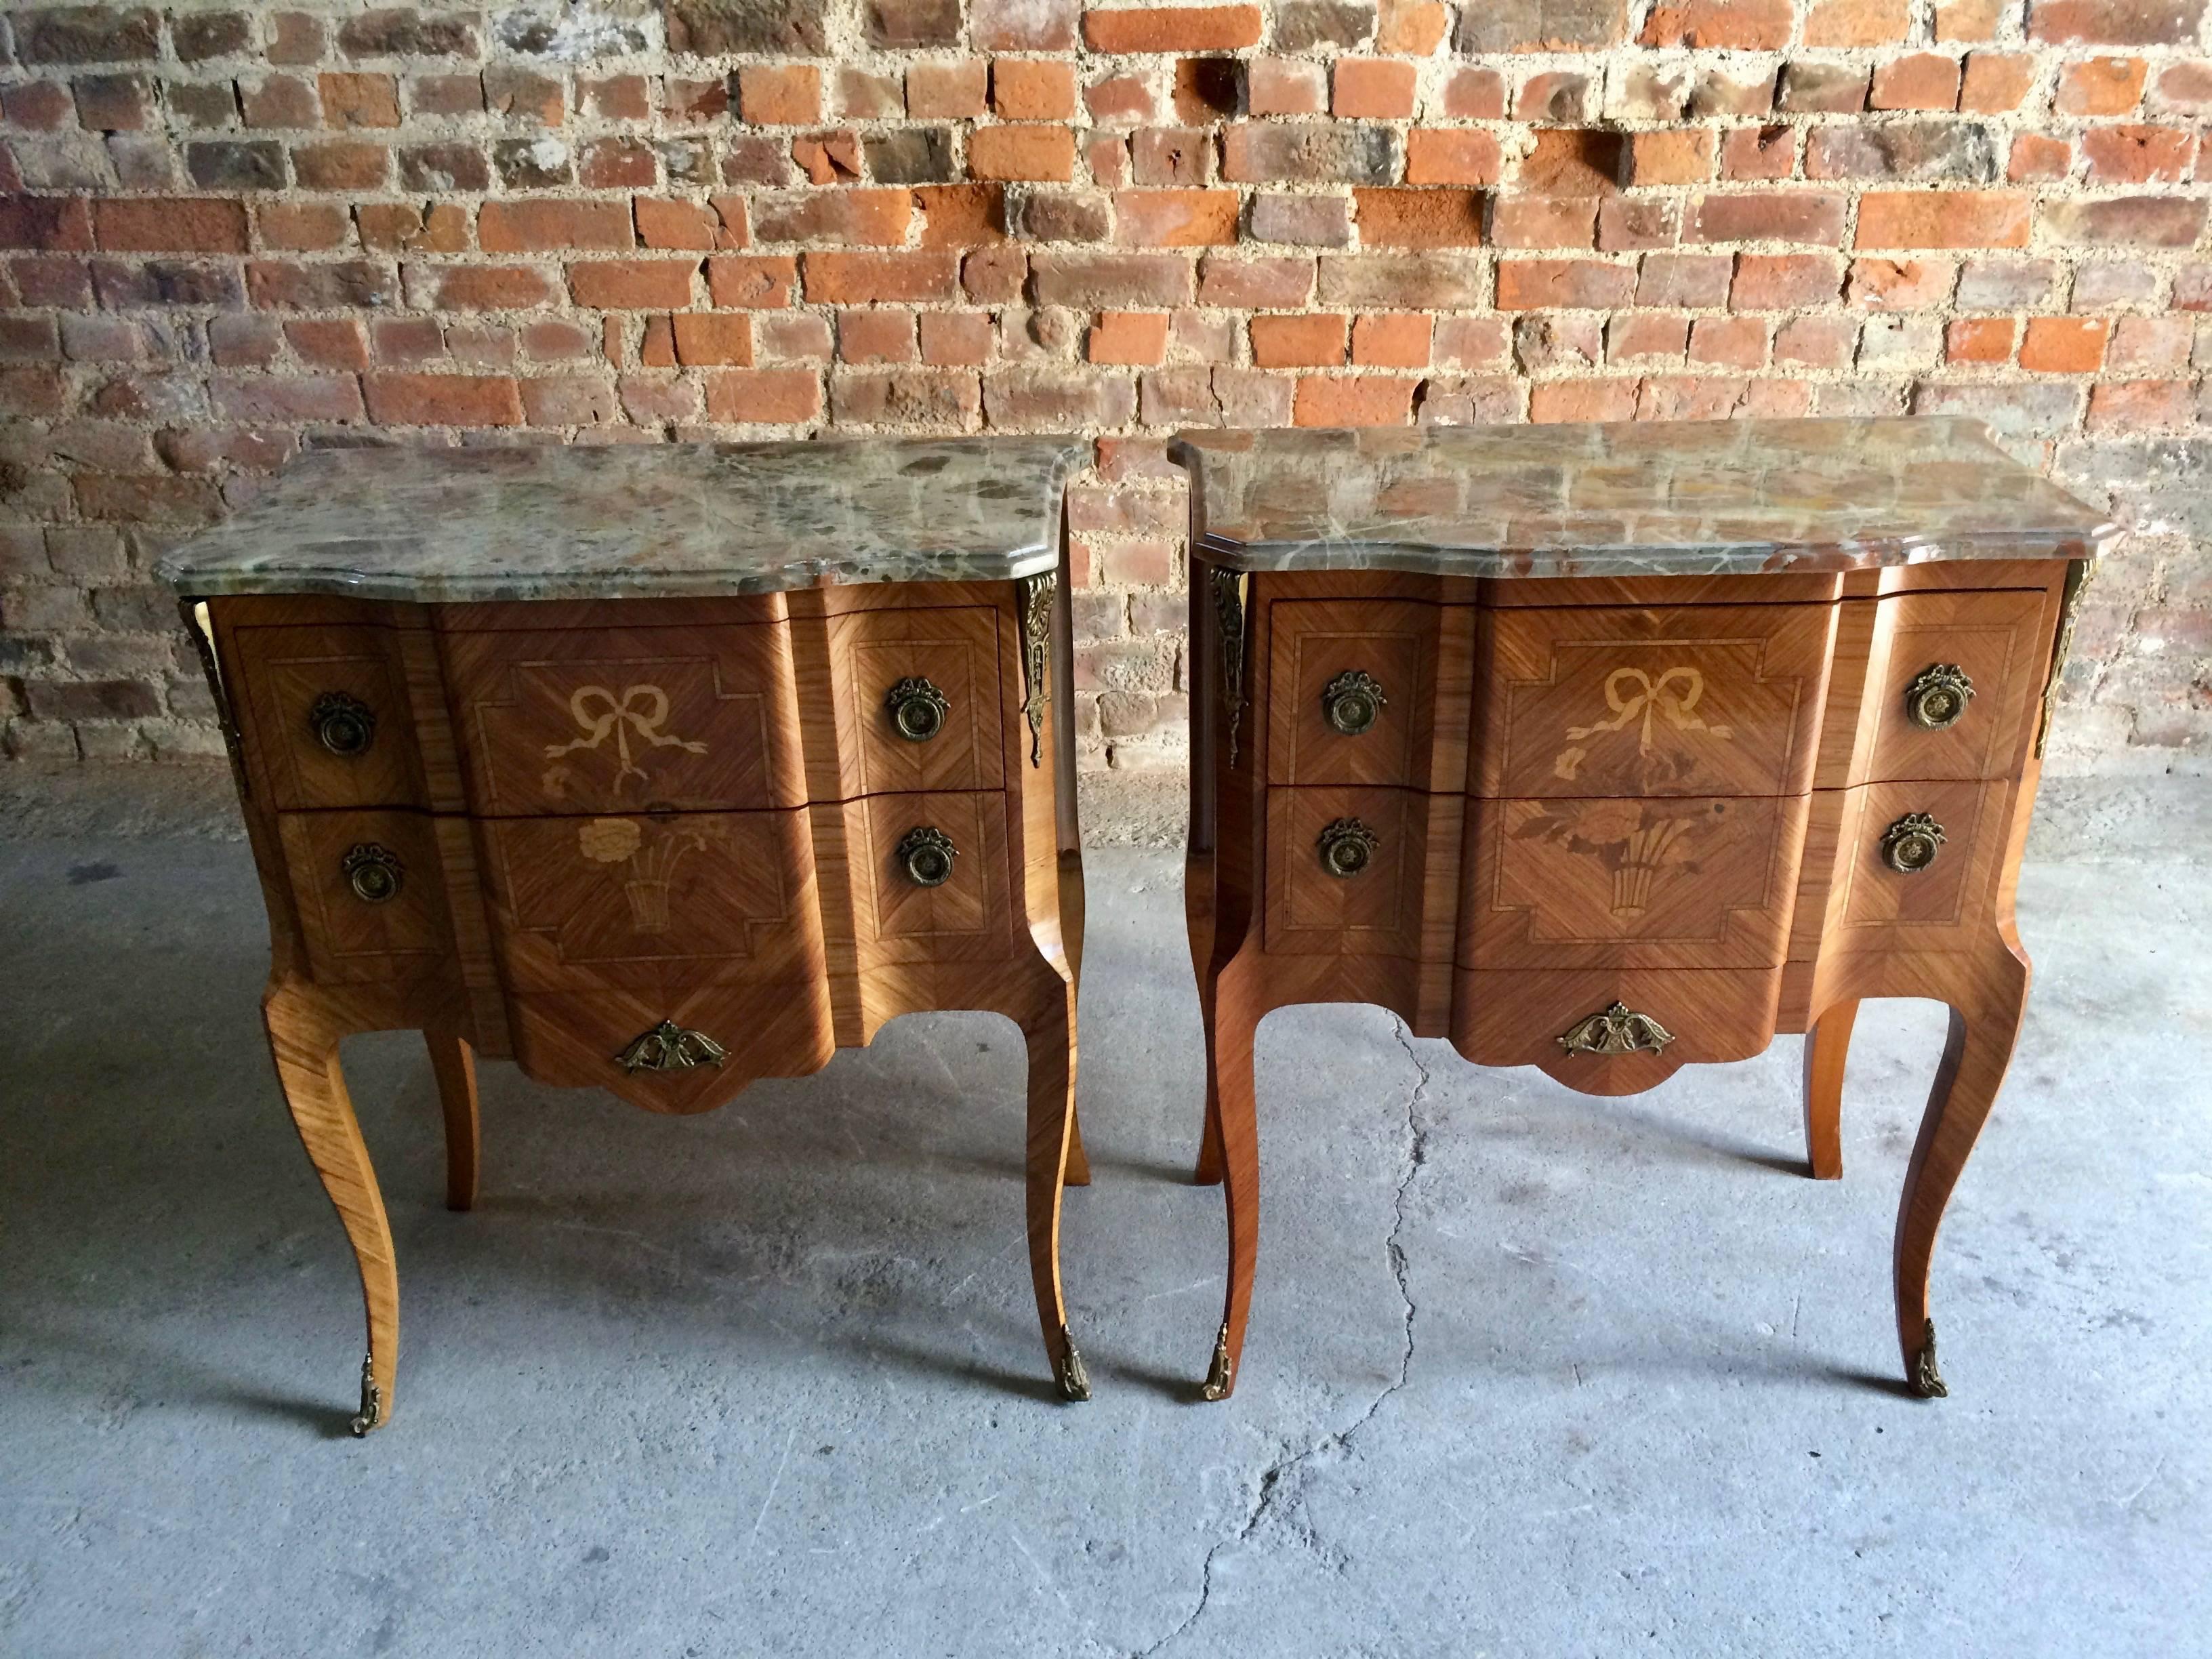 Mid-20th Century Pair of Magnificent French Bedside Tables or Nightstands in Louis XV Style